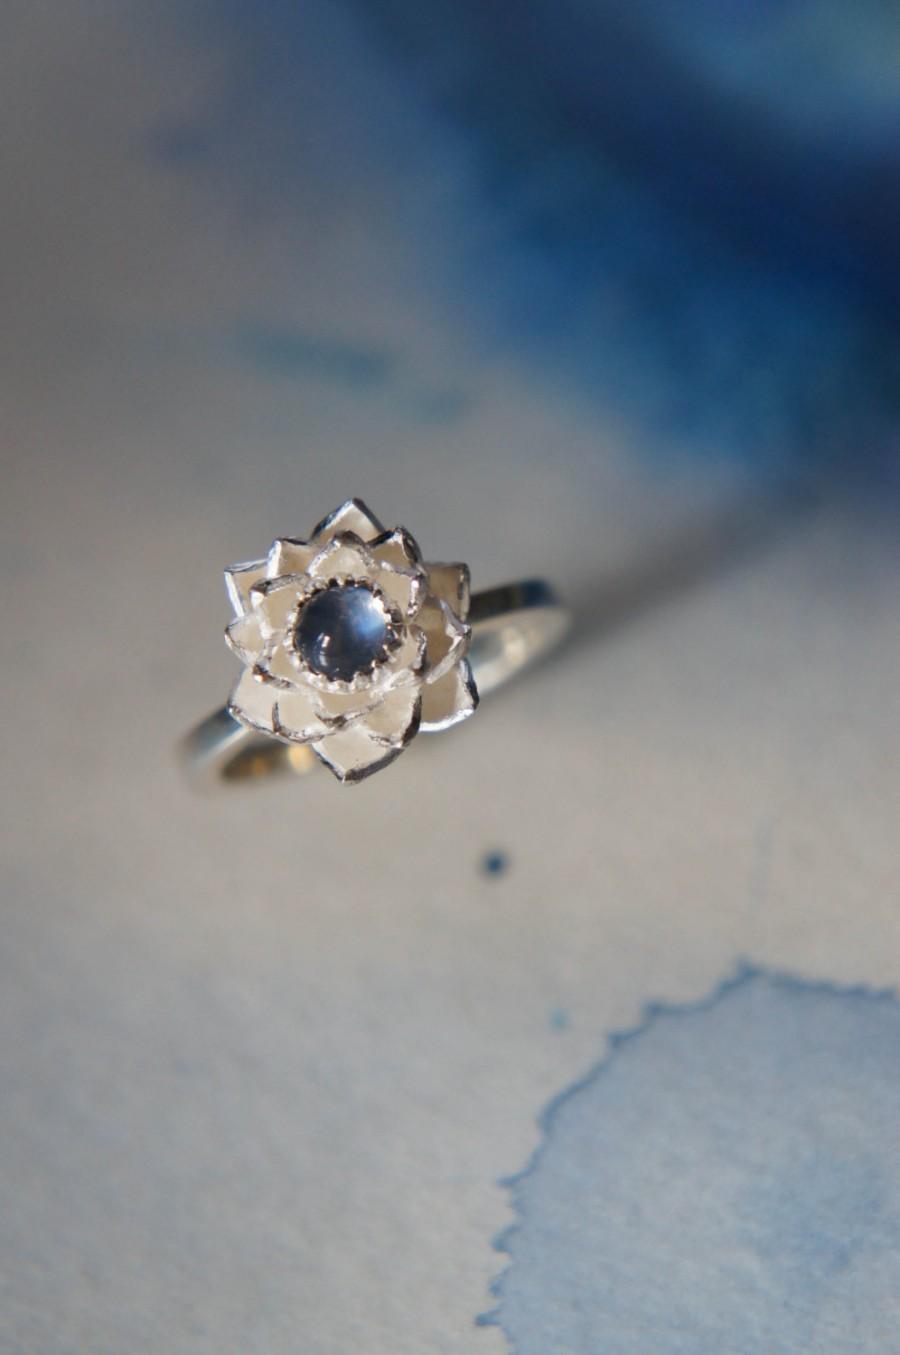 Wedding - Lotus ring, blue moonstone ring, sterling silver ring, flower ring, engagement ring, proposal ring, promise ring, floral jewelry, romantic